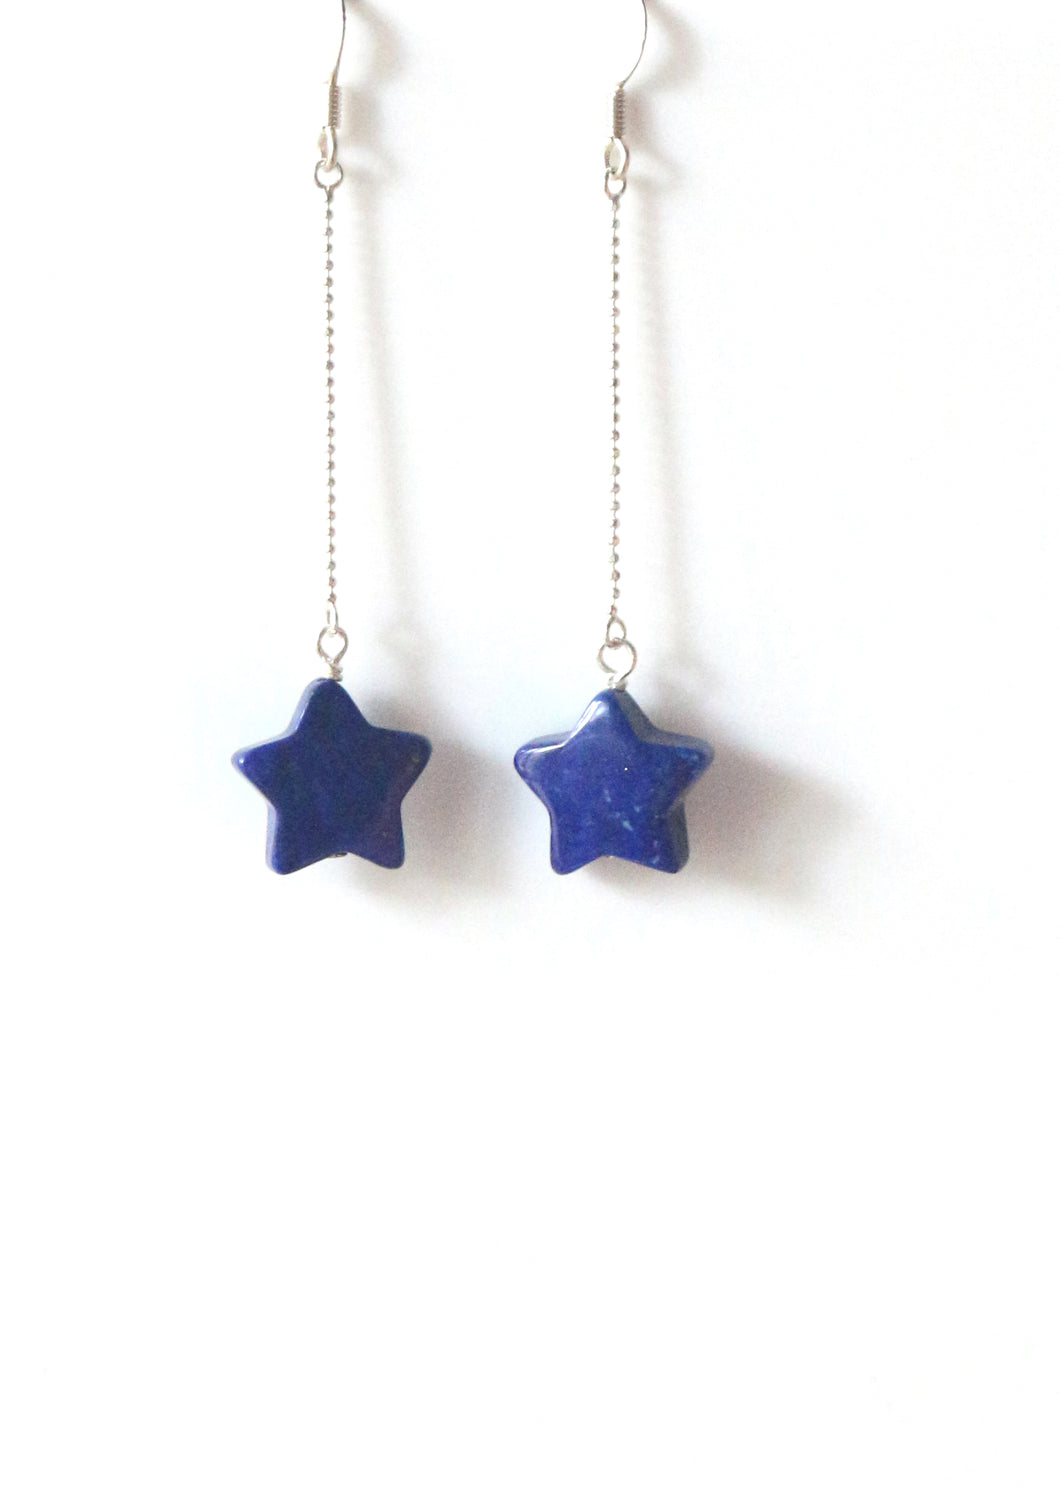 Blue Earrings with Lapis Lazuli Stars and Sterling Silver Chains